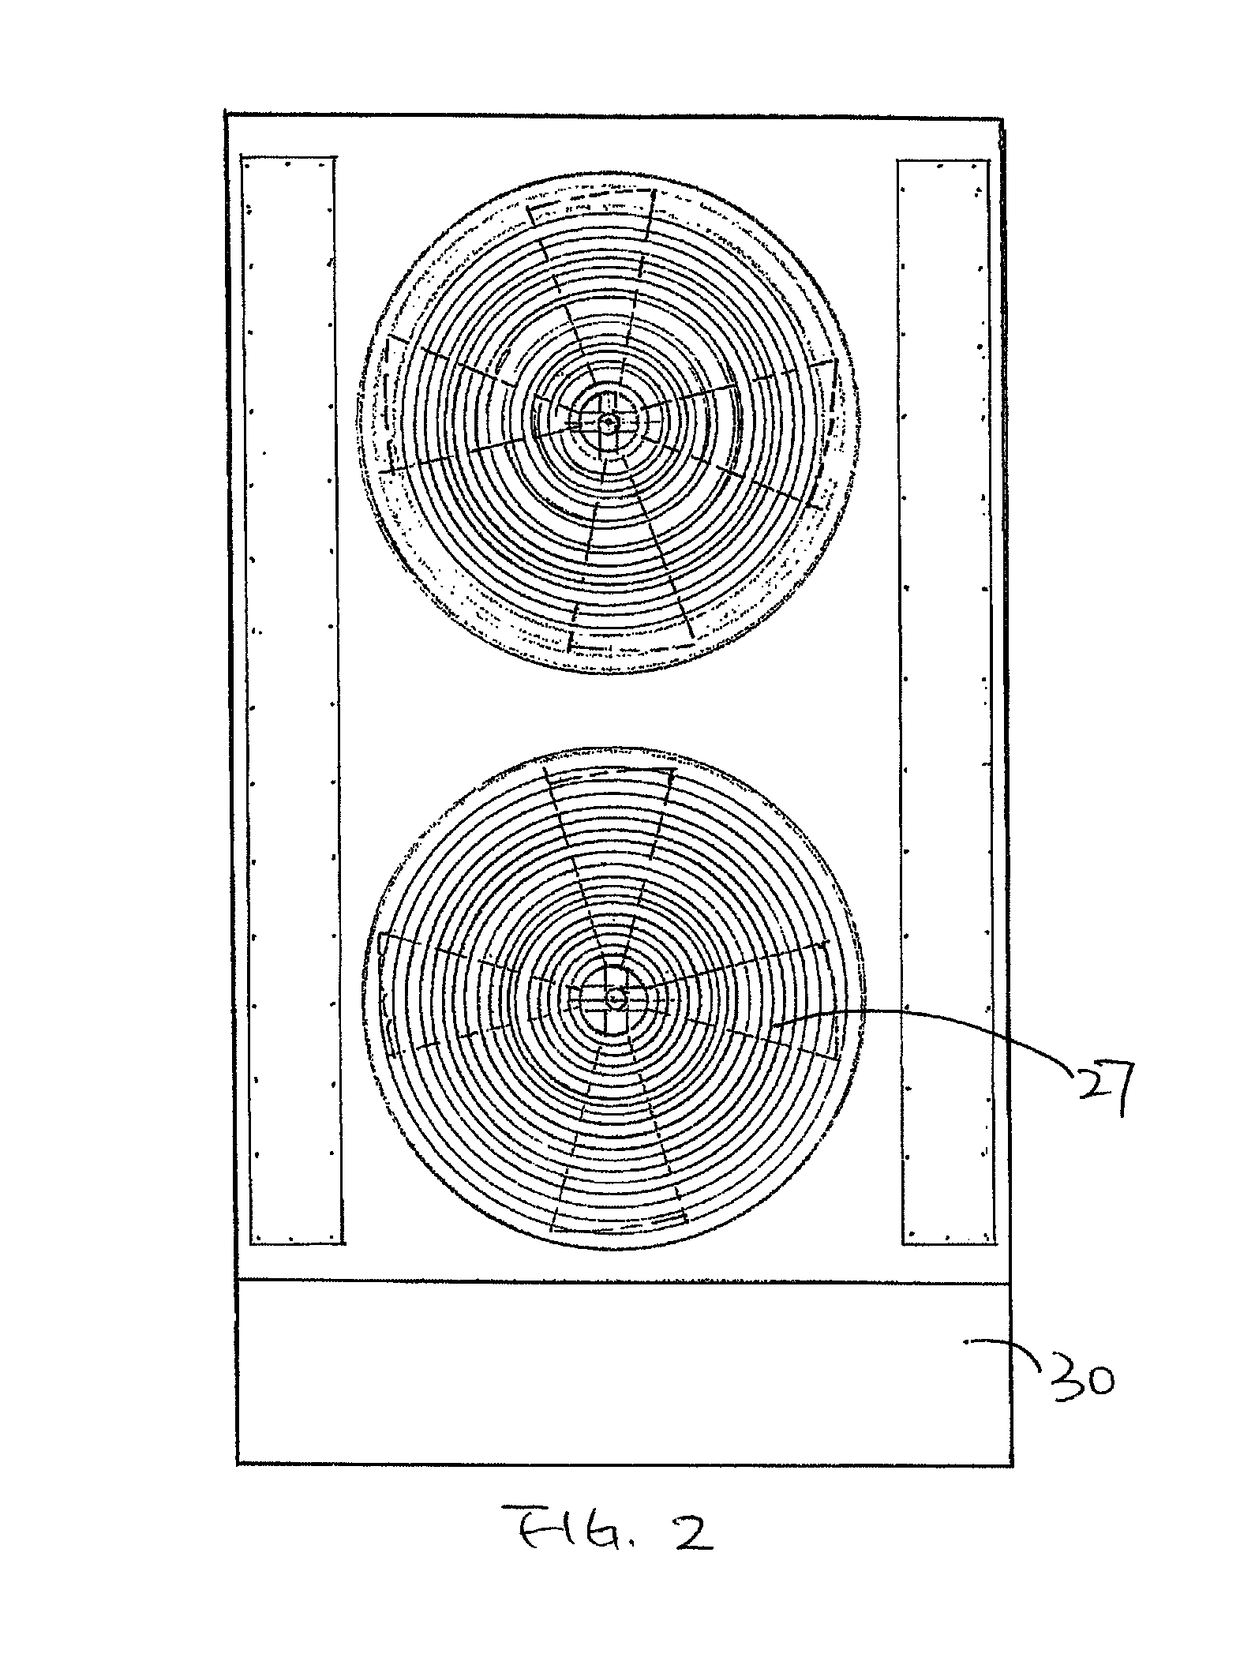 Air conditioning and heat pump system with evaporative cooling system